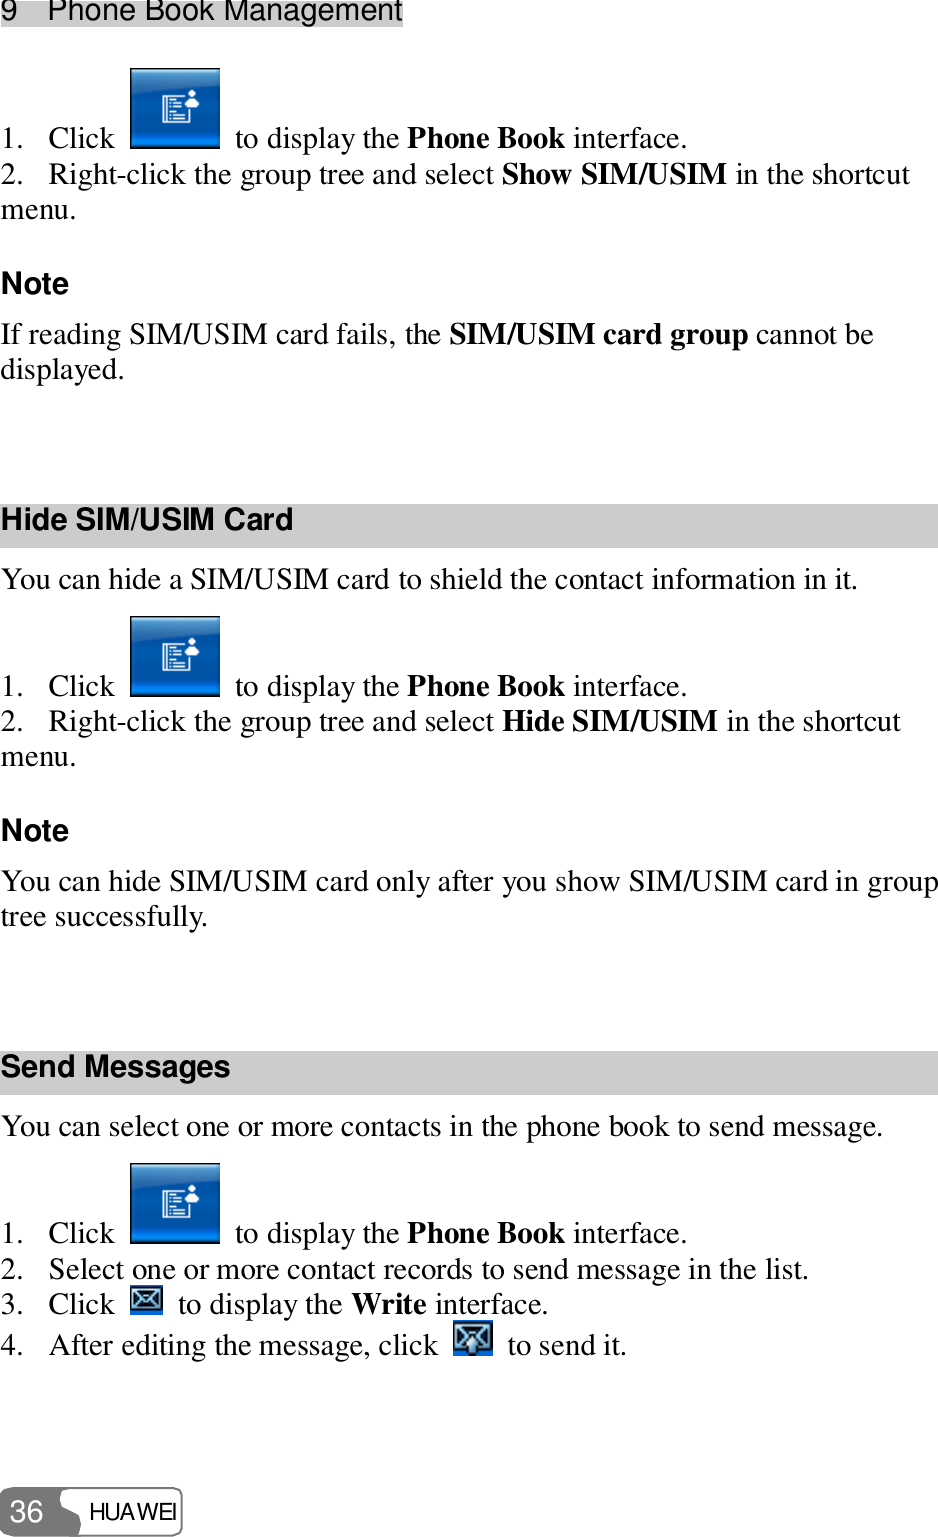 9  Phone Book Management HUAWEI  36 1. Click   to display the Phone Book interface. 2. Right-click the group tree and select Show SIM/USIM in the shortcut menu. Note If reading SIM/USIM card fails, the SIM/USIM card group cannot be displayed.  Hide SIM/USIM Card You can hide a SIM/USIM card to shield the contact information in it. 1. Click   to display the Phone Book interface. 2. Right-click the group tree and select Hide SIM/USIM in the shortcut menu. Note You can hide SIM/USIM card only after you show SIM/USIM card in group tree successfully.  Send Messages You can select one or more contacts in the phone book to send message. 1. Click   to display the Phone Book interface. 2. Select one or more contact records to send message in the list. 3. Click   to display the Write interface. 4. After editing the message, click   to send it. 